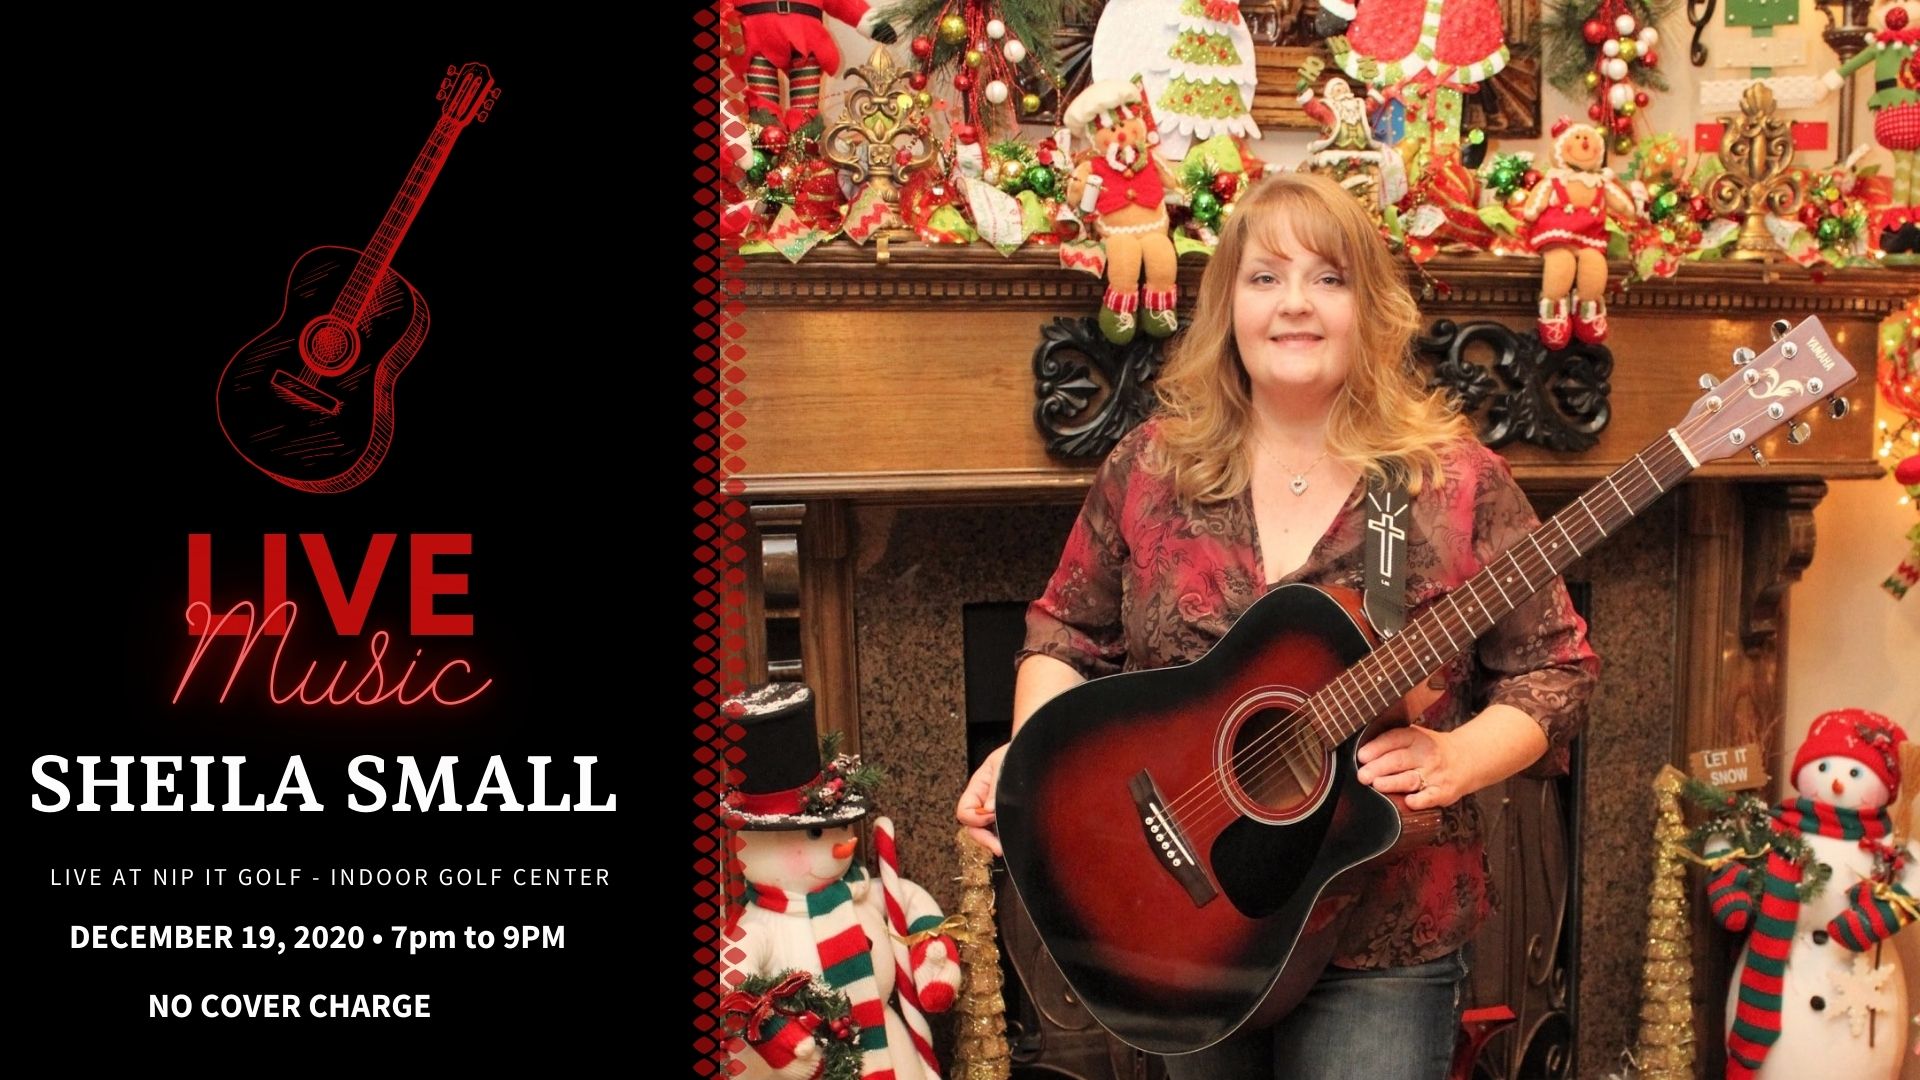 Live Music featuring Sheila Small